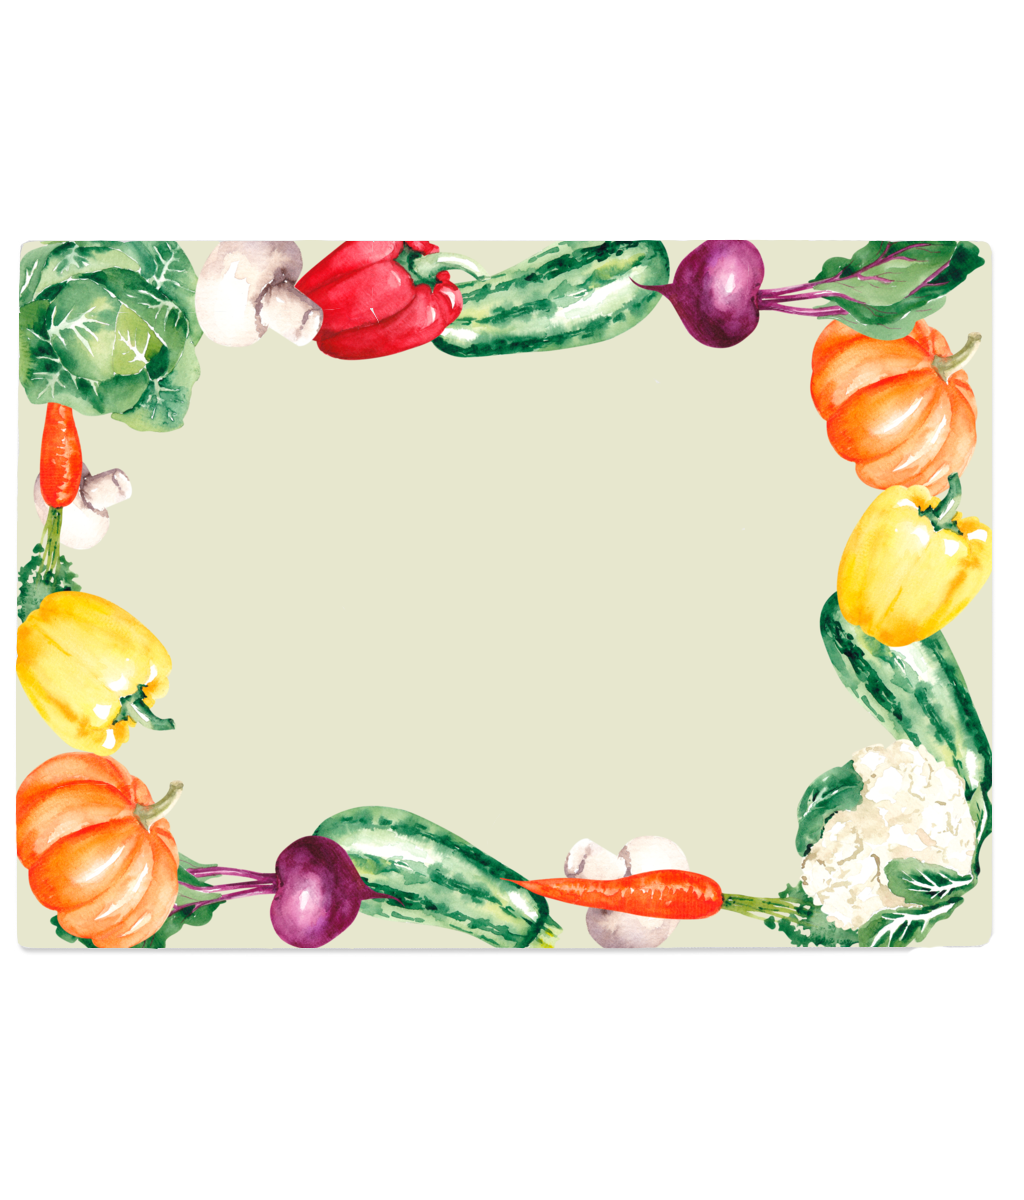 Tempered Glass Chopping Board Chopping Board With Vegetable Design